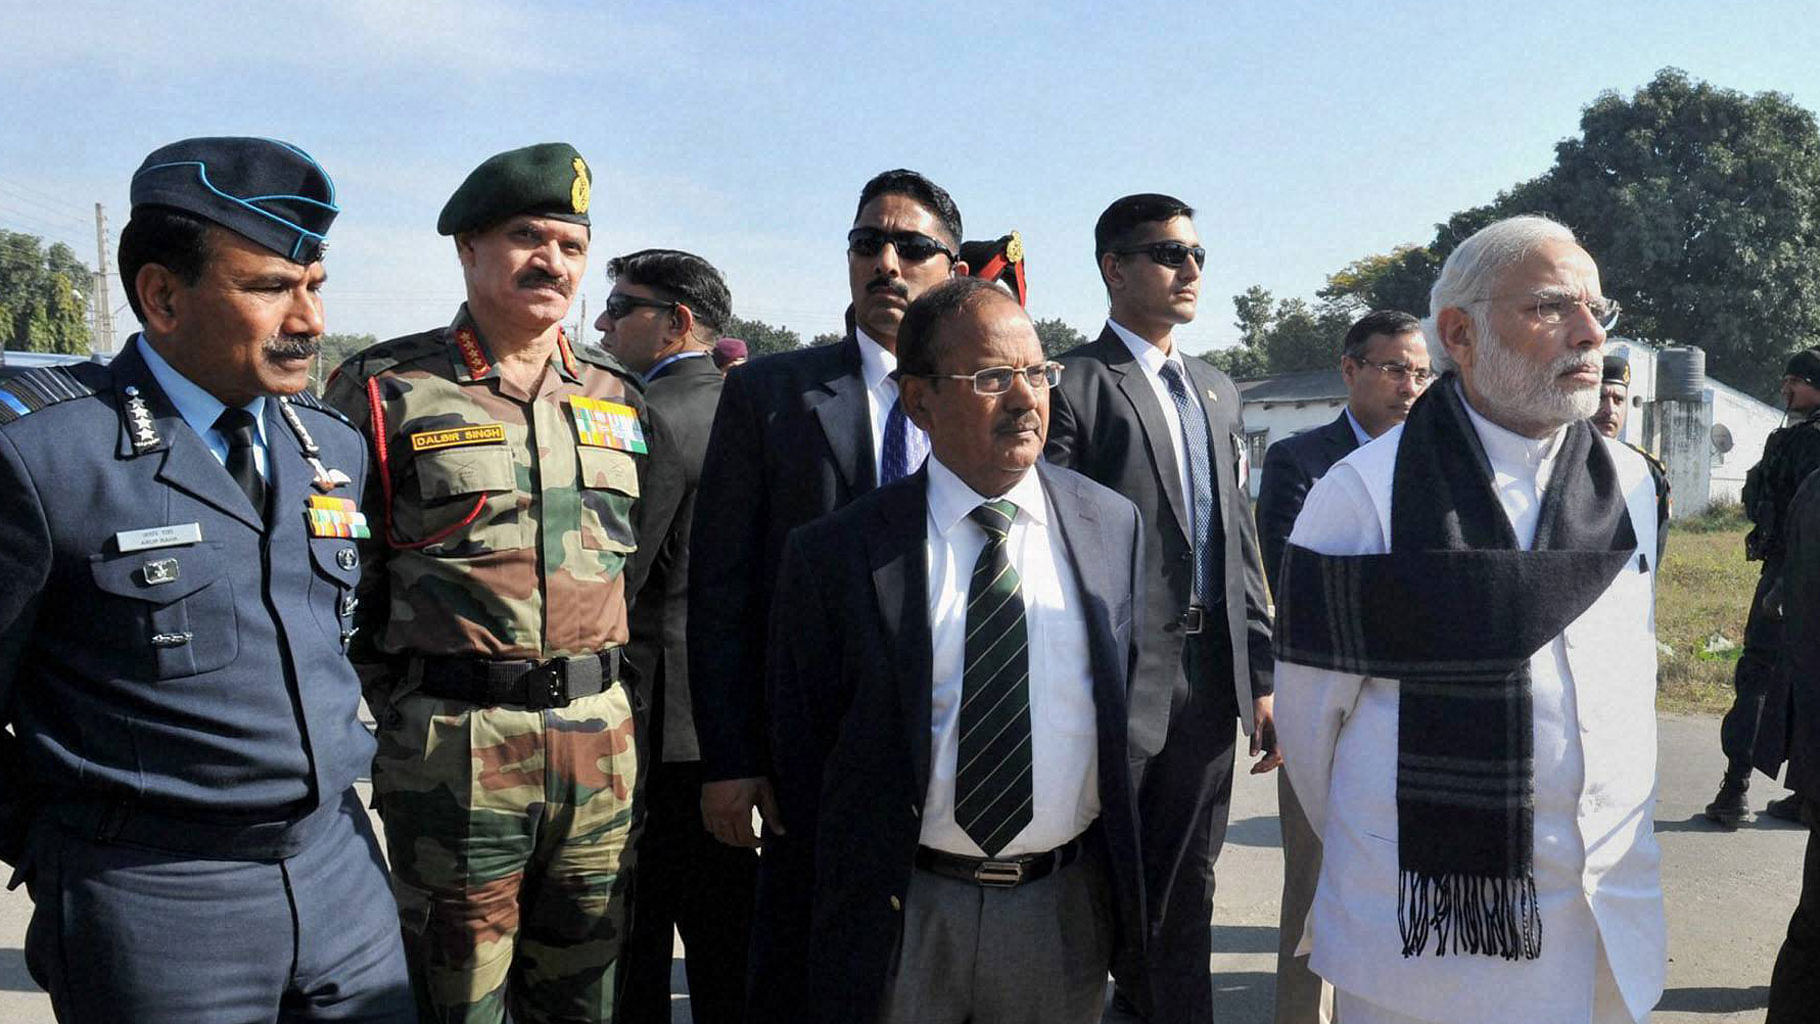 Narendra Modi and National Security Adviser Ajit Doval watching a presentation on counter-terrorist and combing operation at Pathankot Airbase. (File Photo: PTI)